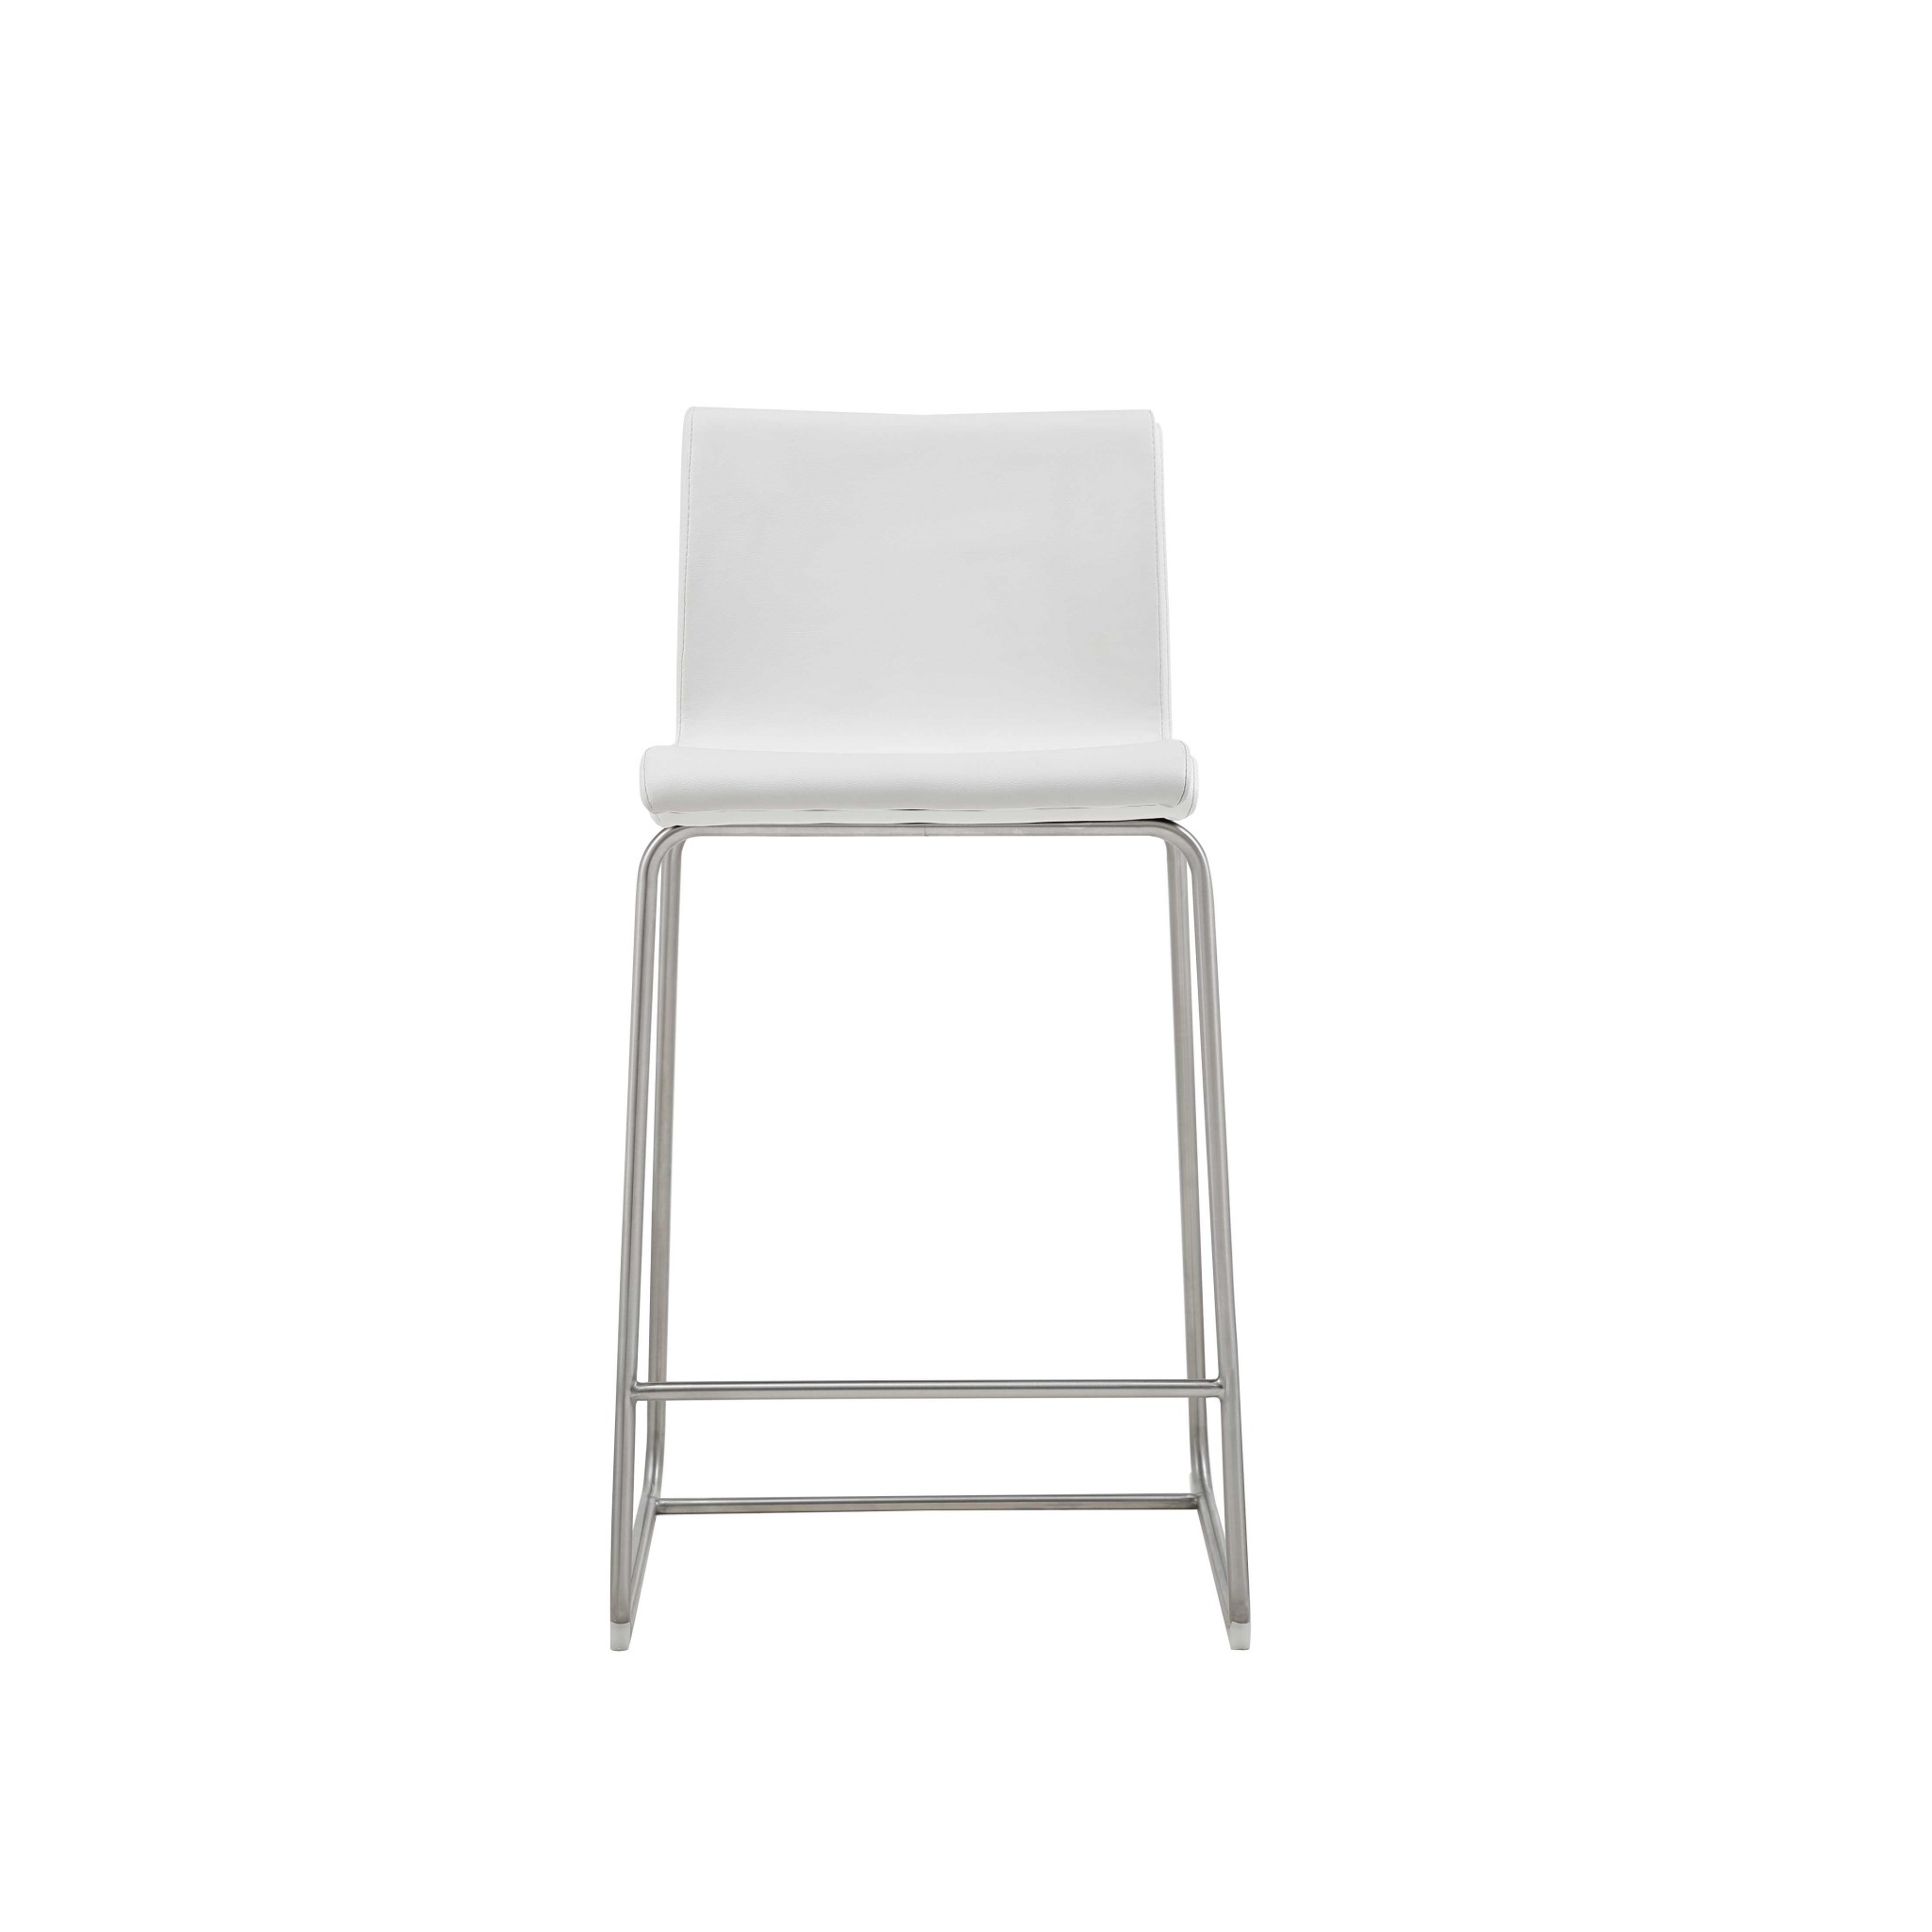 36"H White Faux Leather Low Back Counter Stool